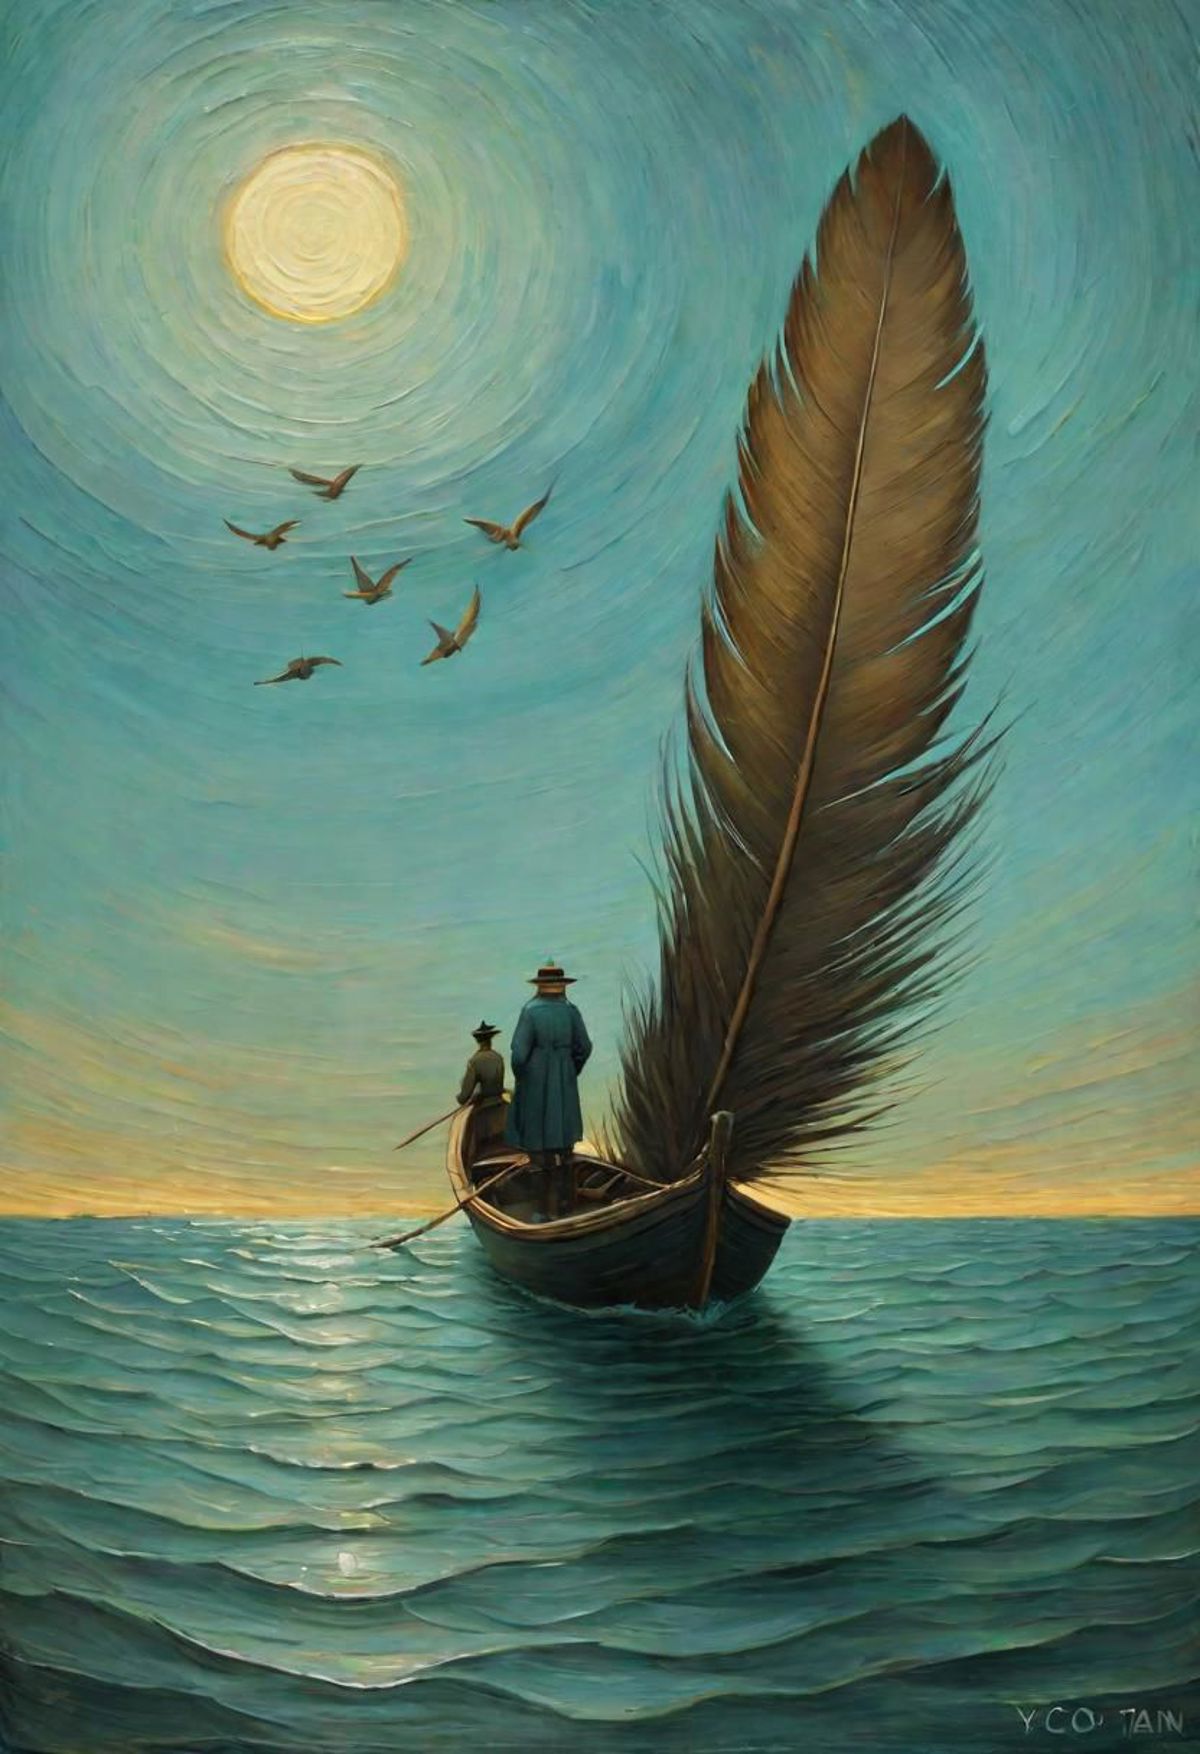 A painting of a man and a woman in a boat at sea with birds flying overhead.